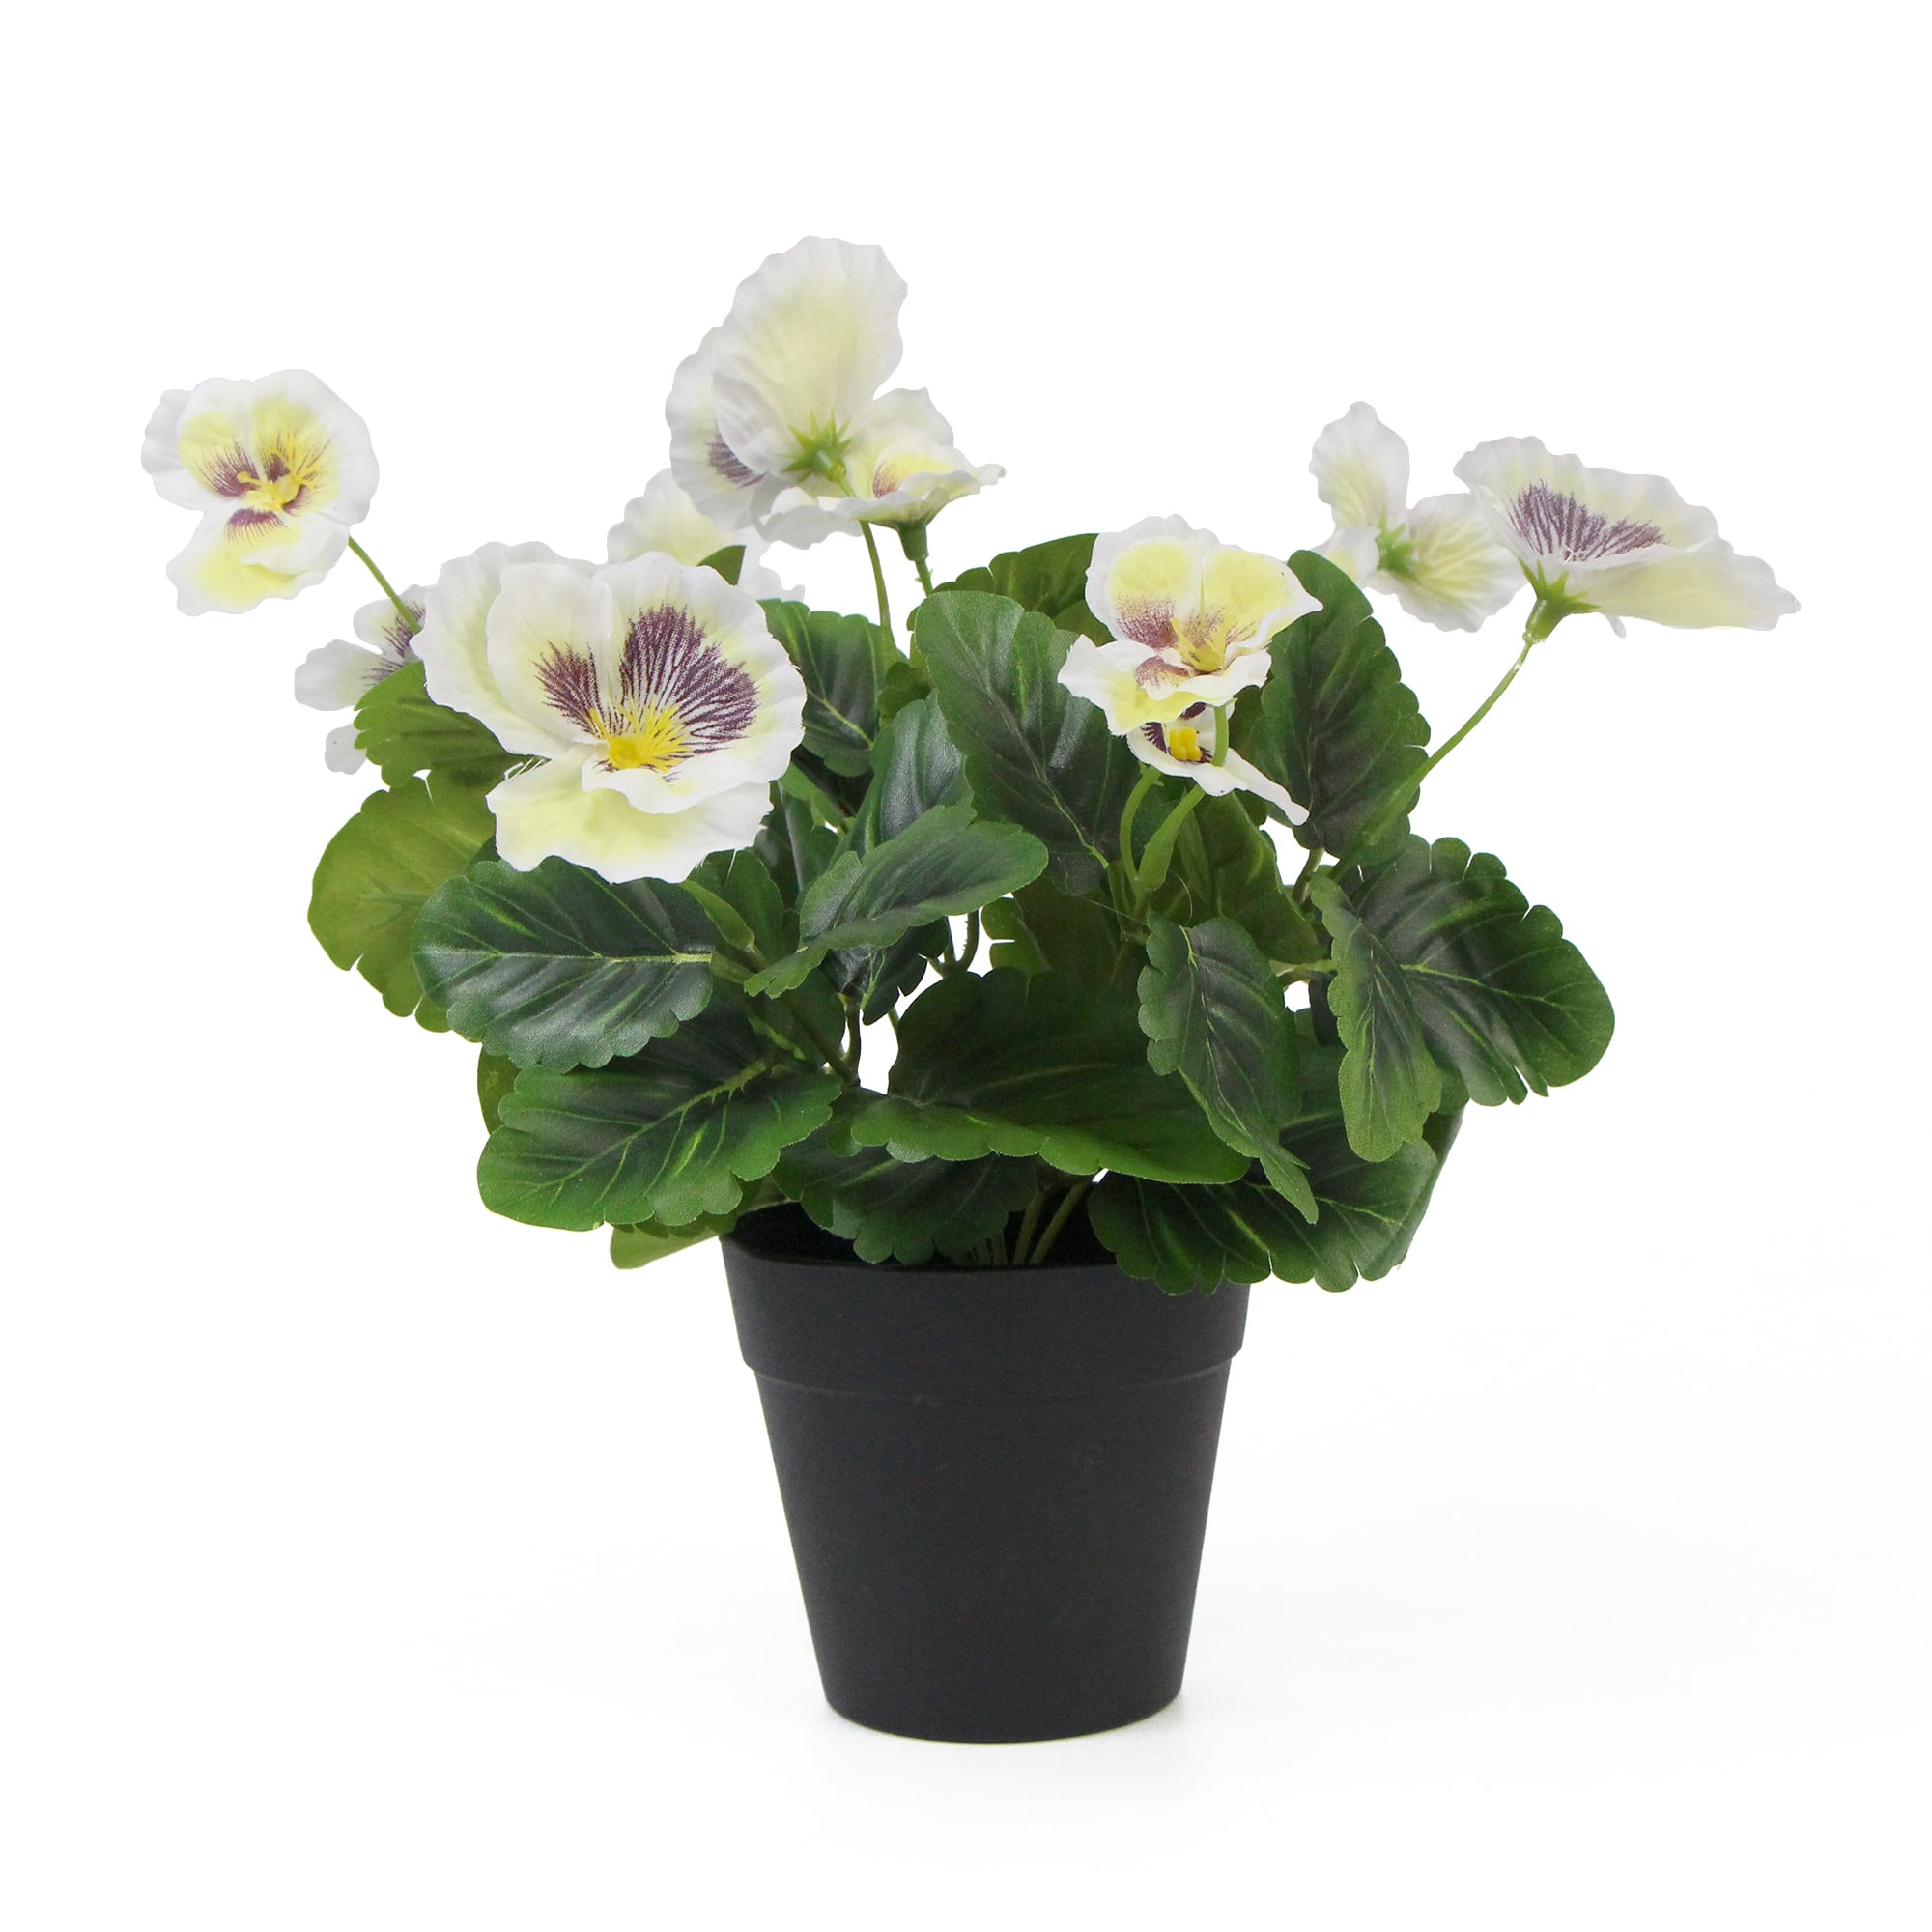 Mixed White Flowering Potted Artificial Pansy Plants 25cm - Designer Vertical Gardens Artificial Shrubs and Small plants Flowering plants